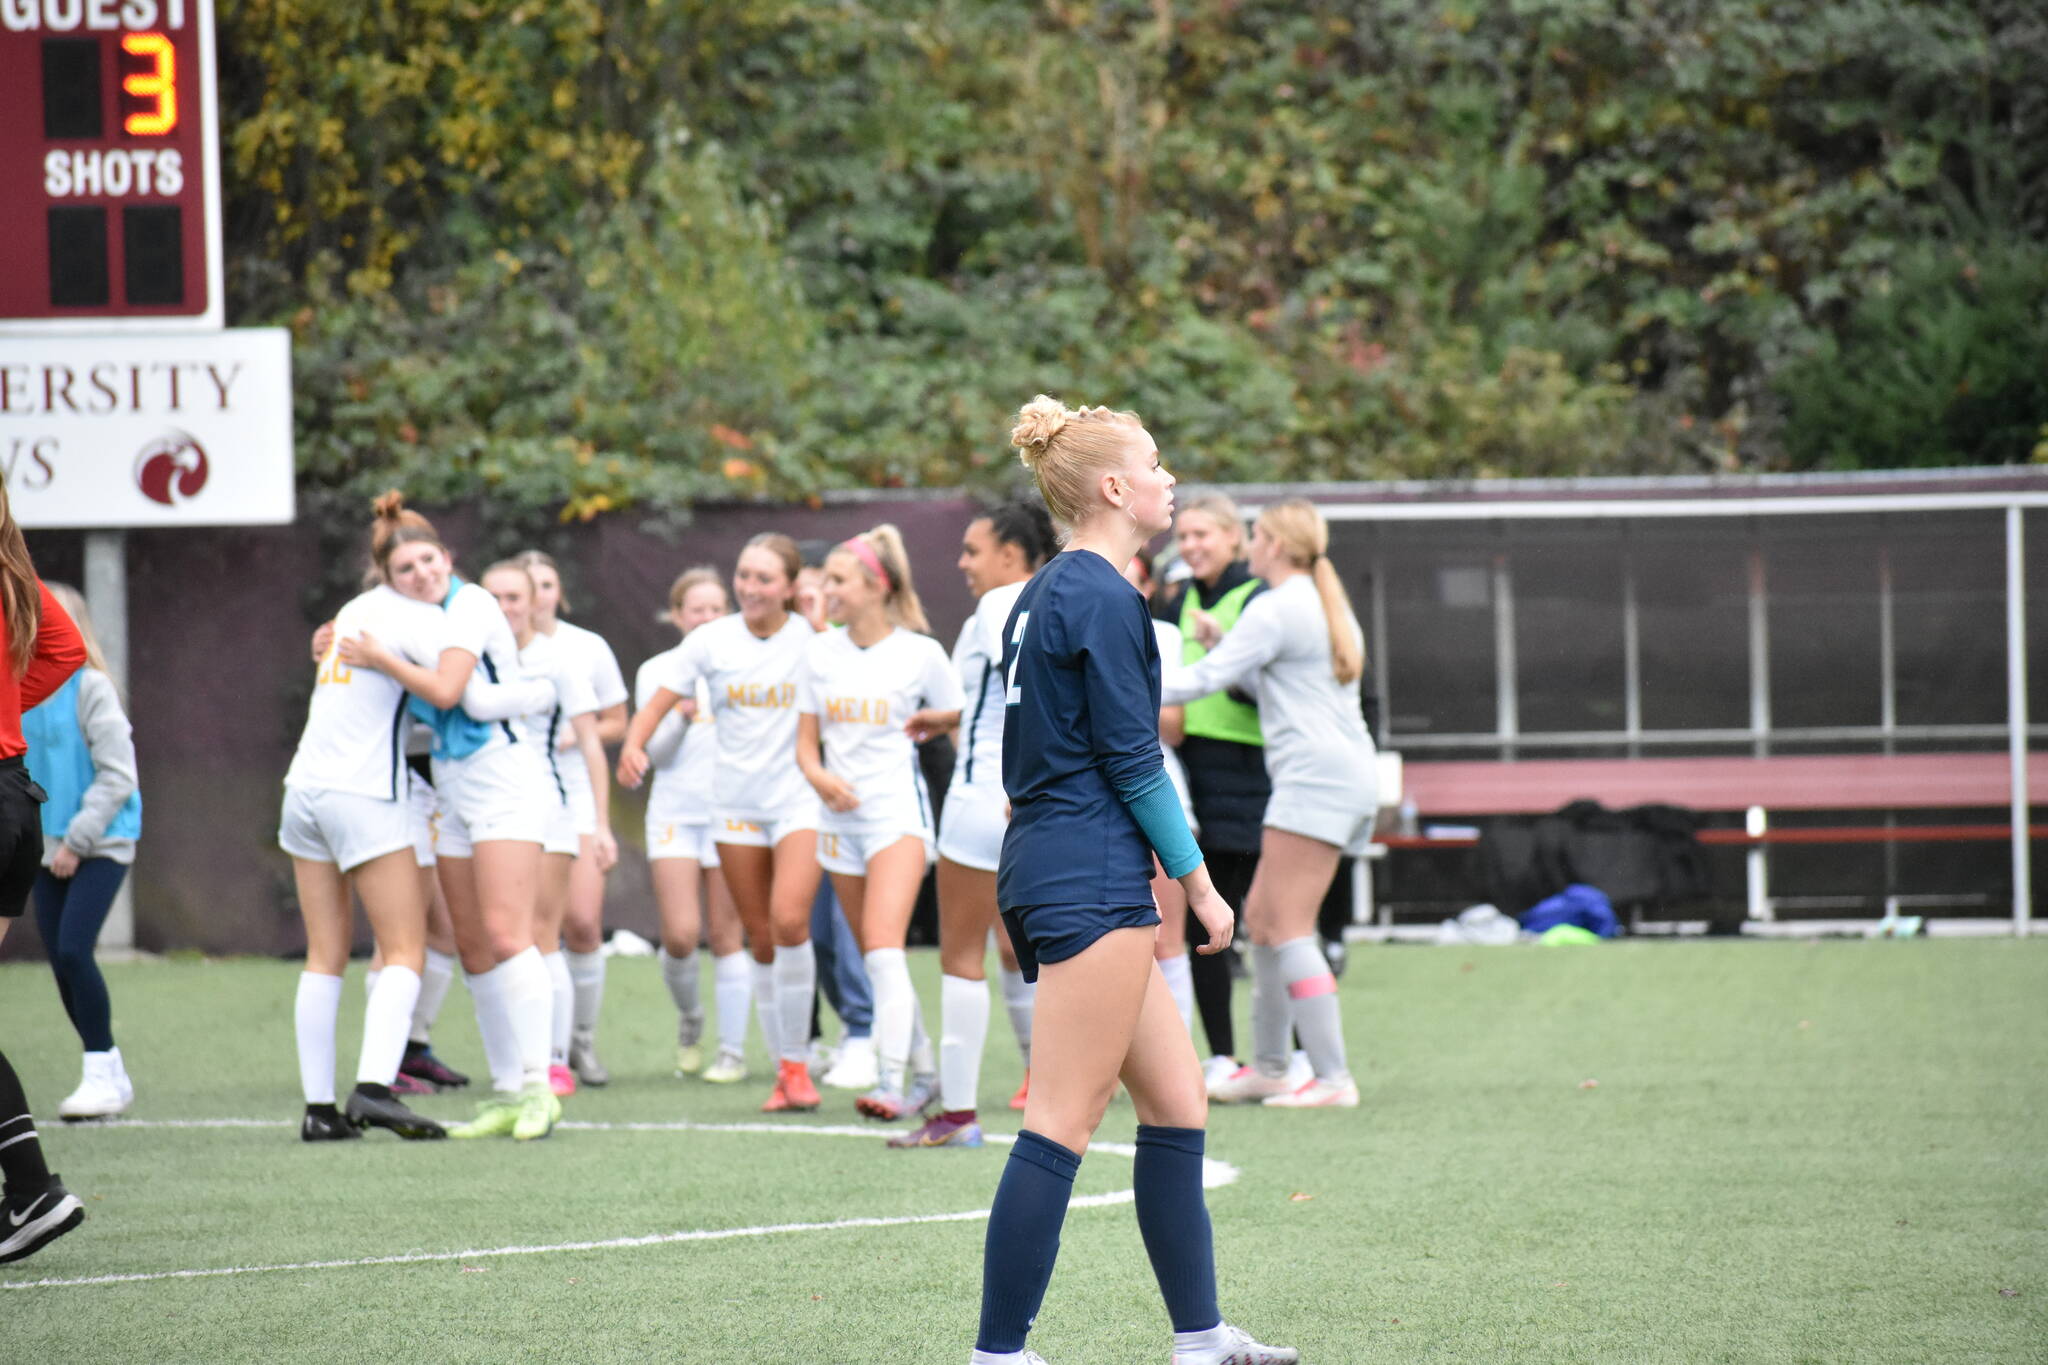 Senior Sienna Tew walks towards her keeper Rory Murry as Mead celebrates. Ben Ray / The Reporter